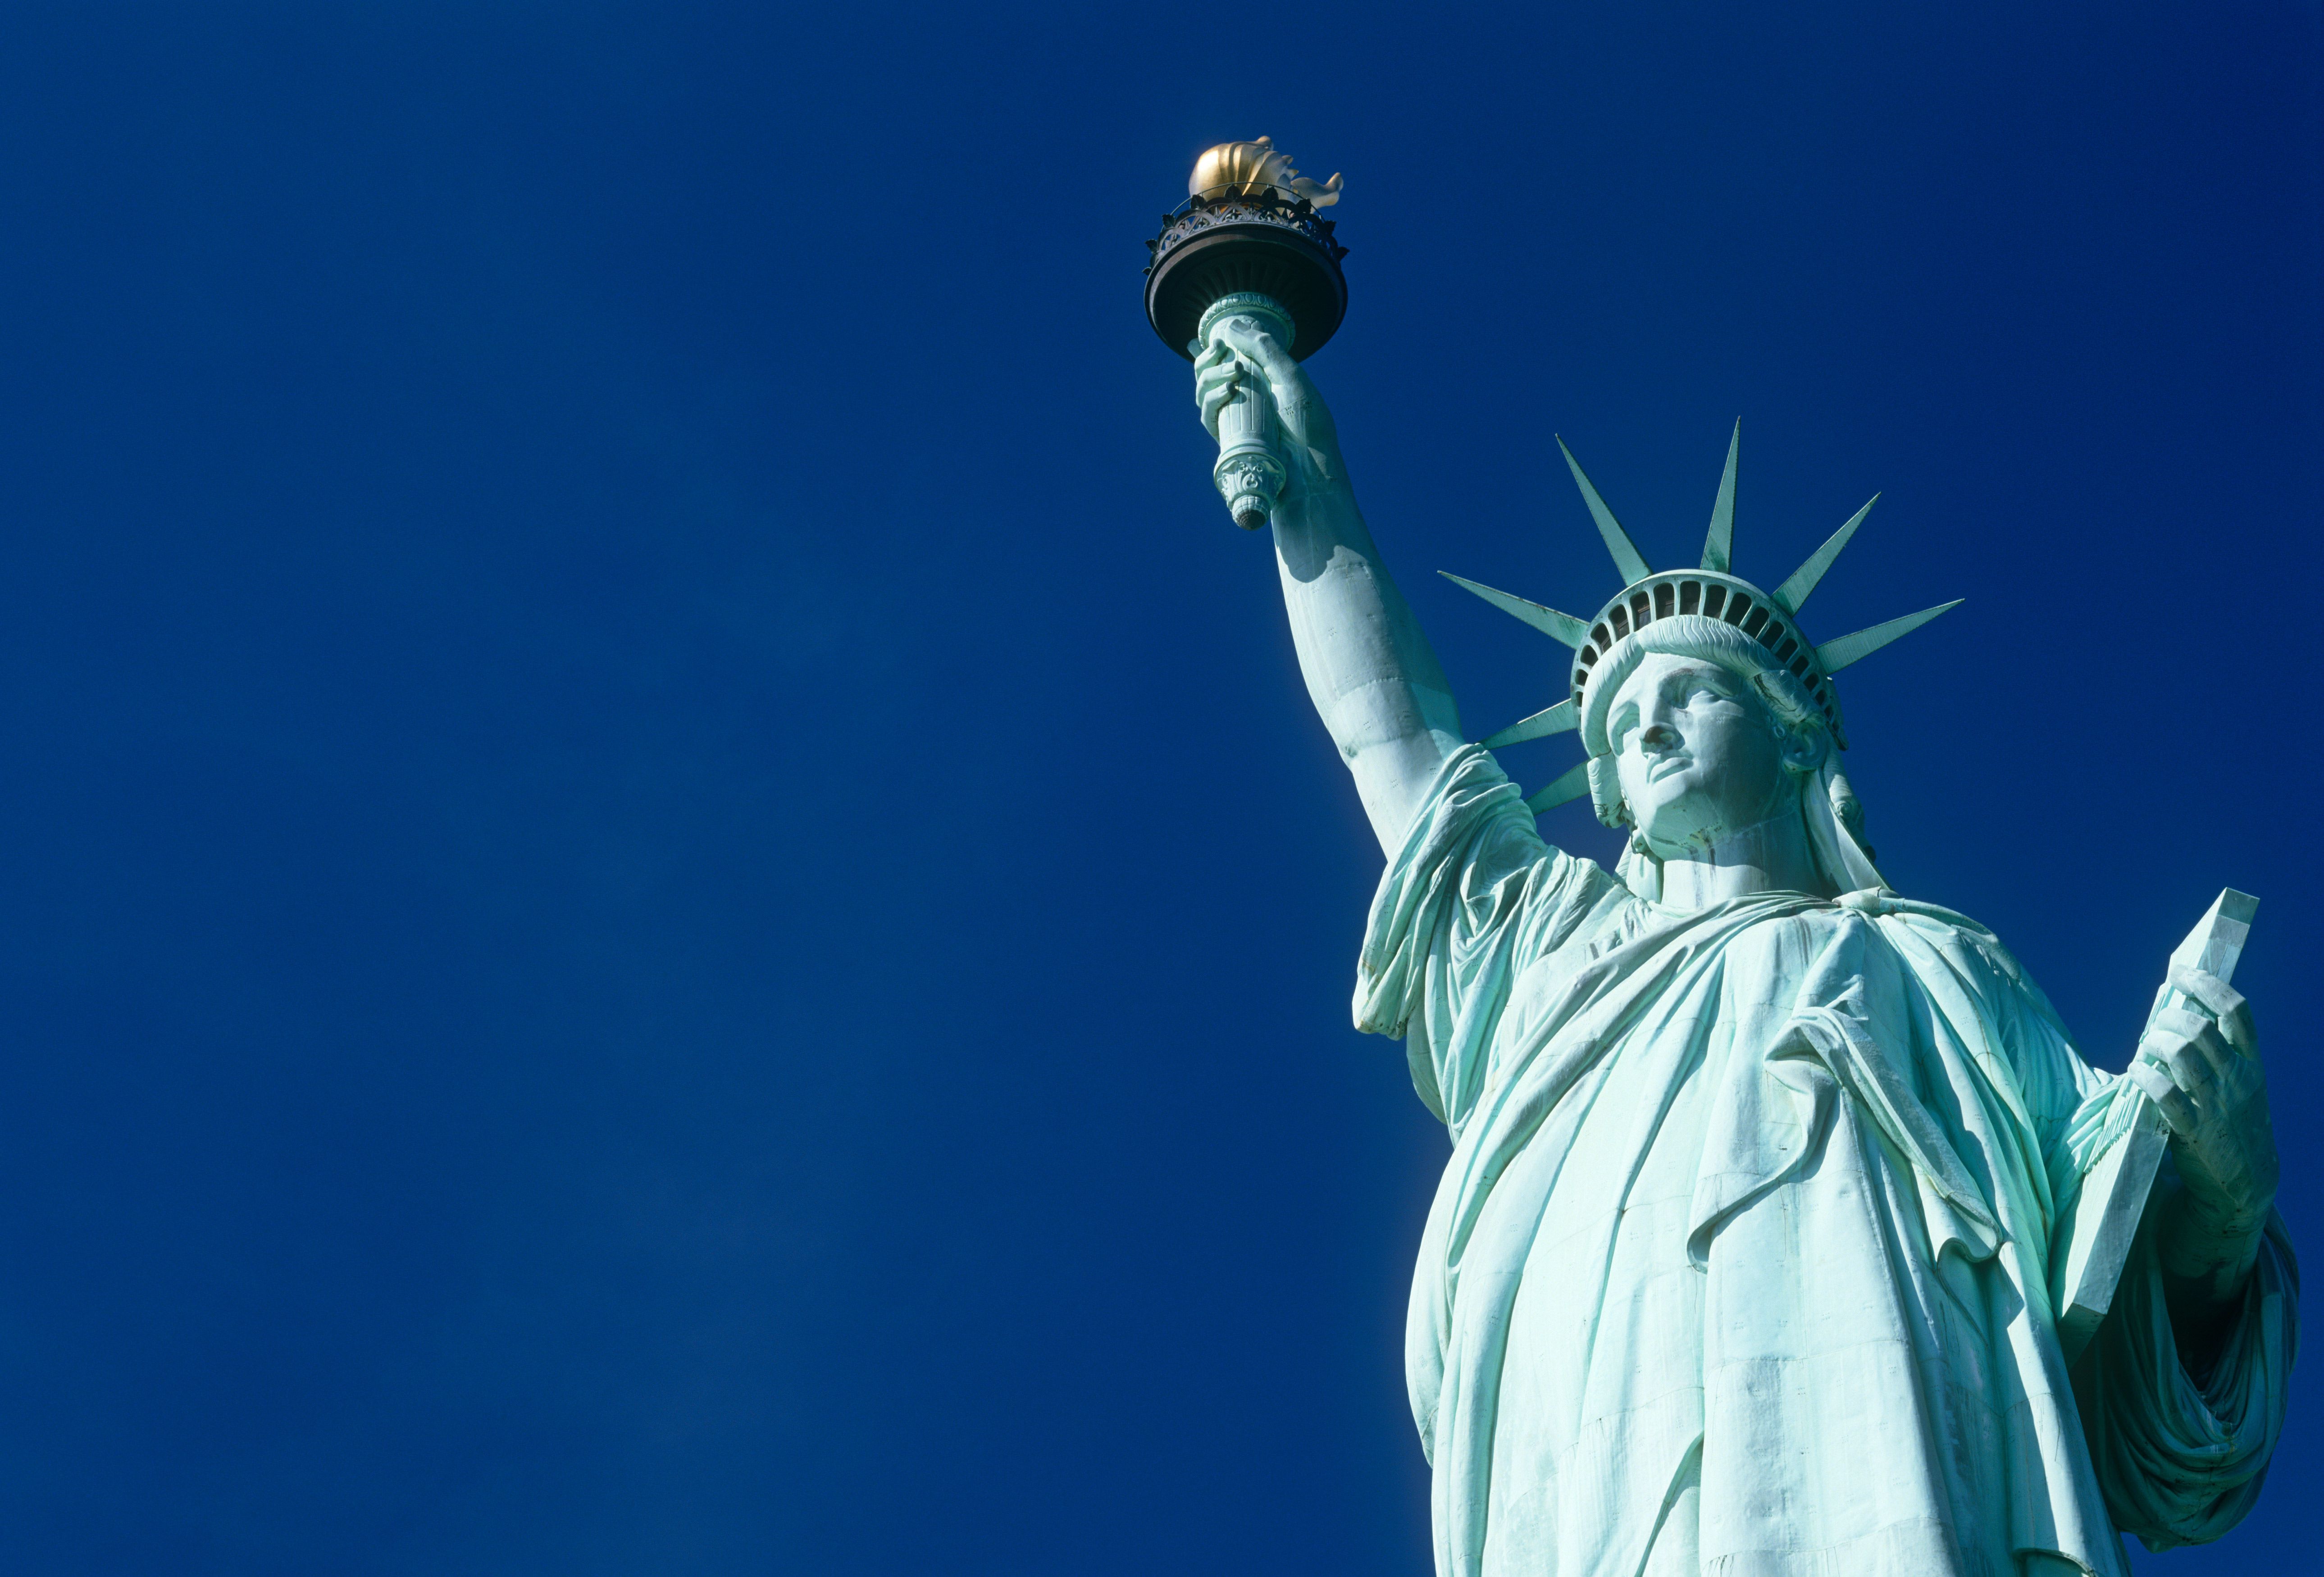 The Statue of Liberty Is Experiencing a Surge in Visitors